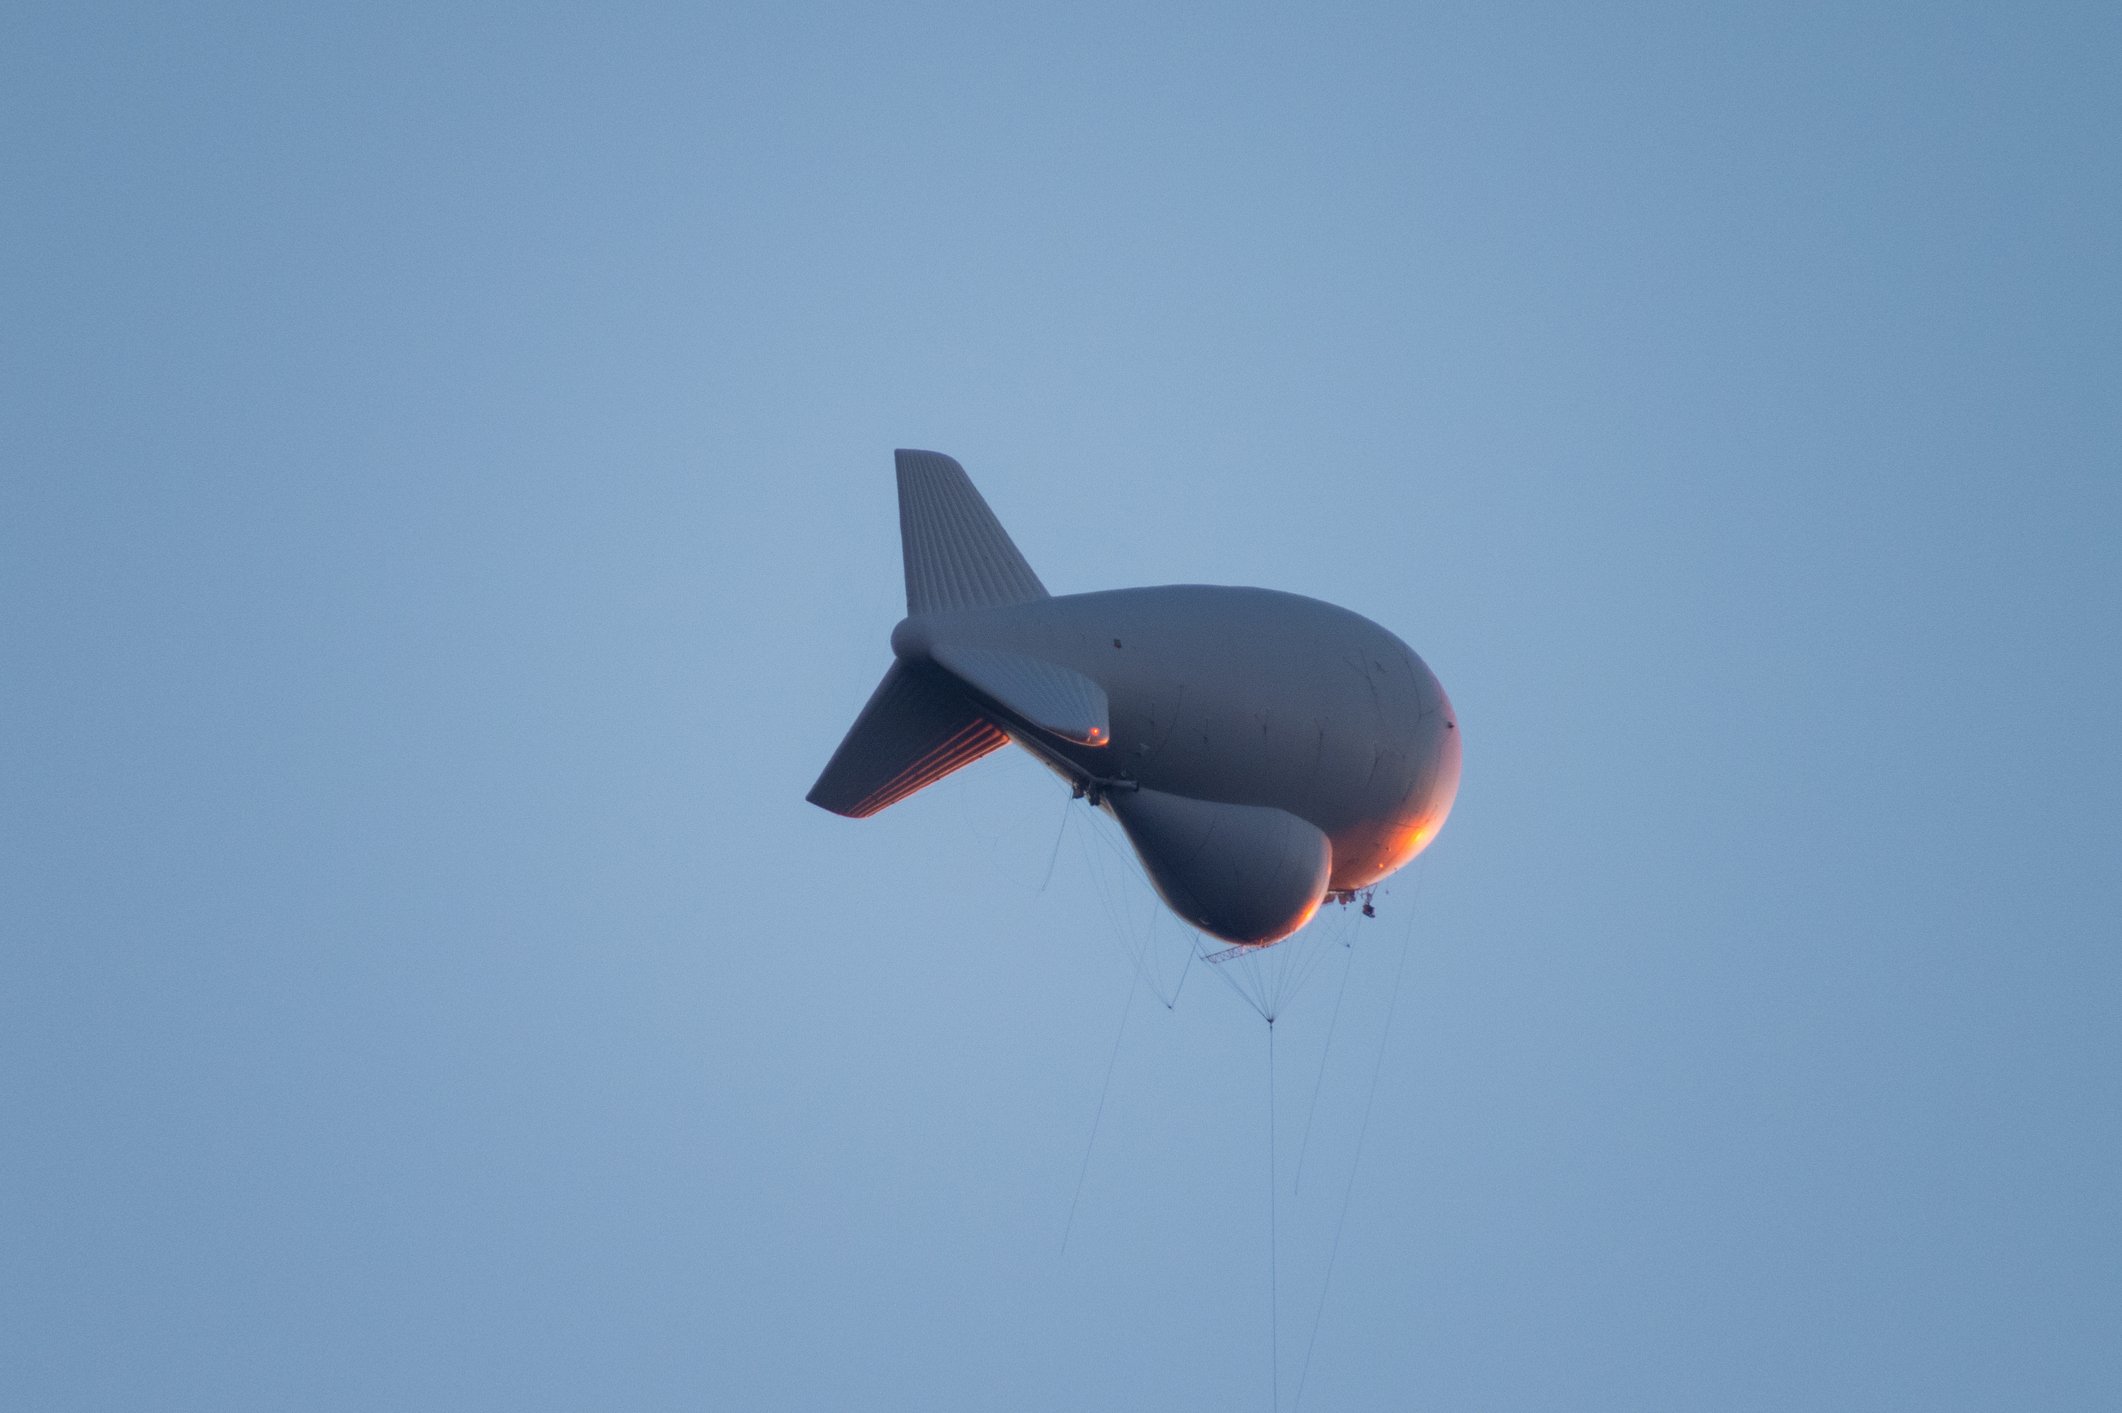 Aerostat is tethered high above the Huachuca Mountains with bright orange reflection from the setting sun.